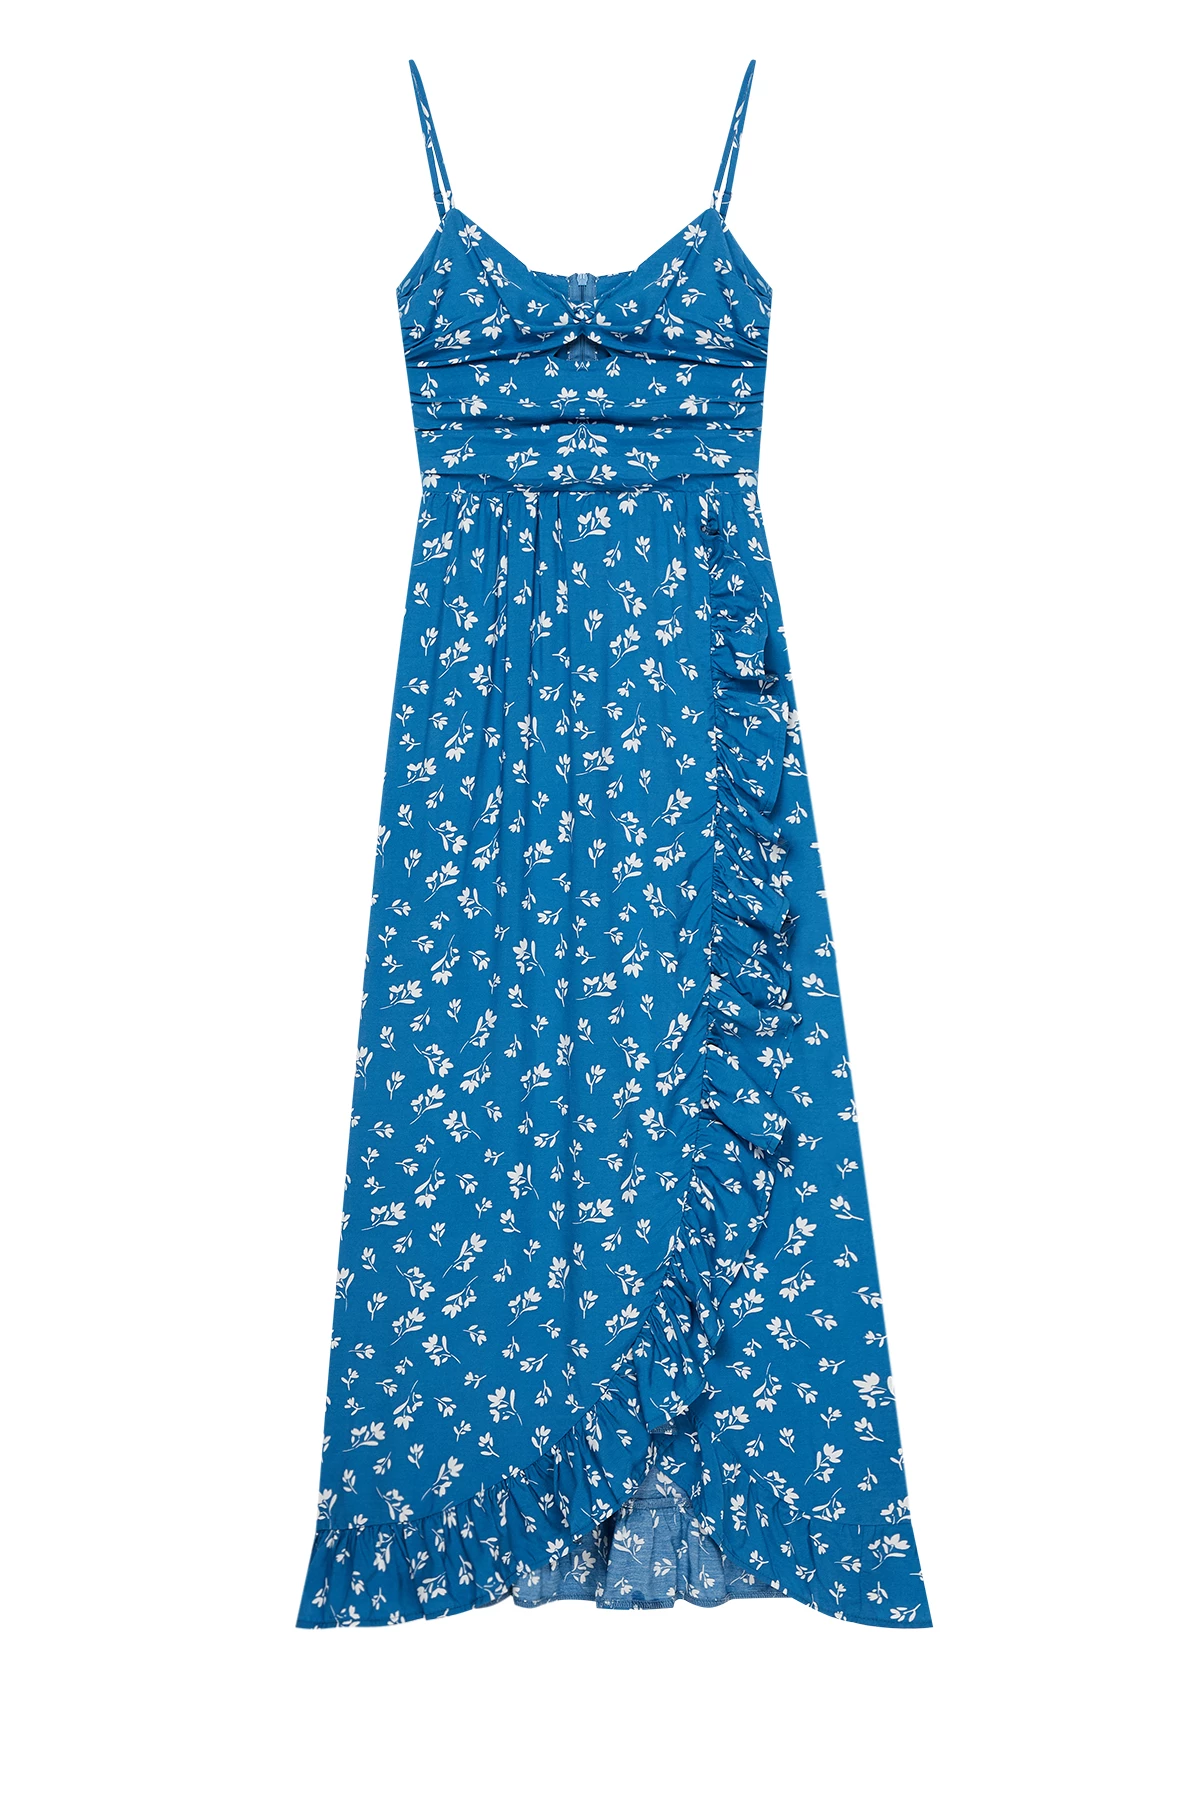 Blue viscose maxi sundress in floral print, photo 6